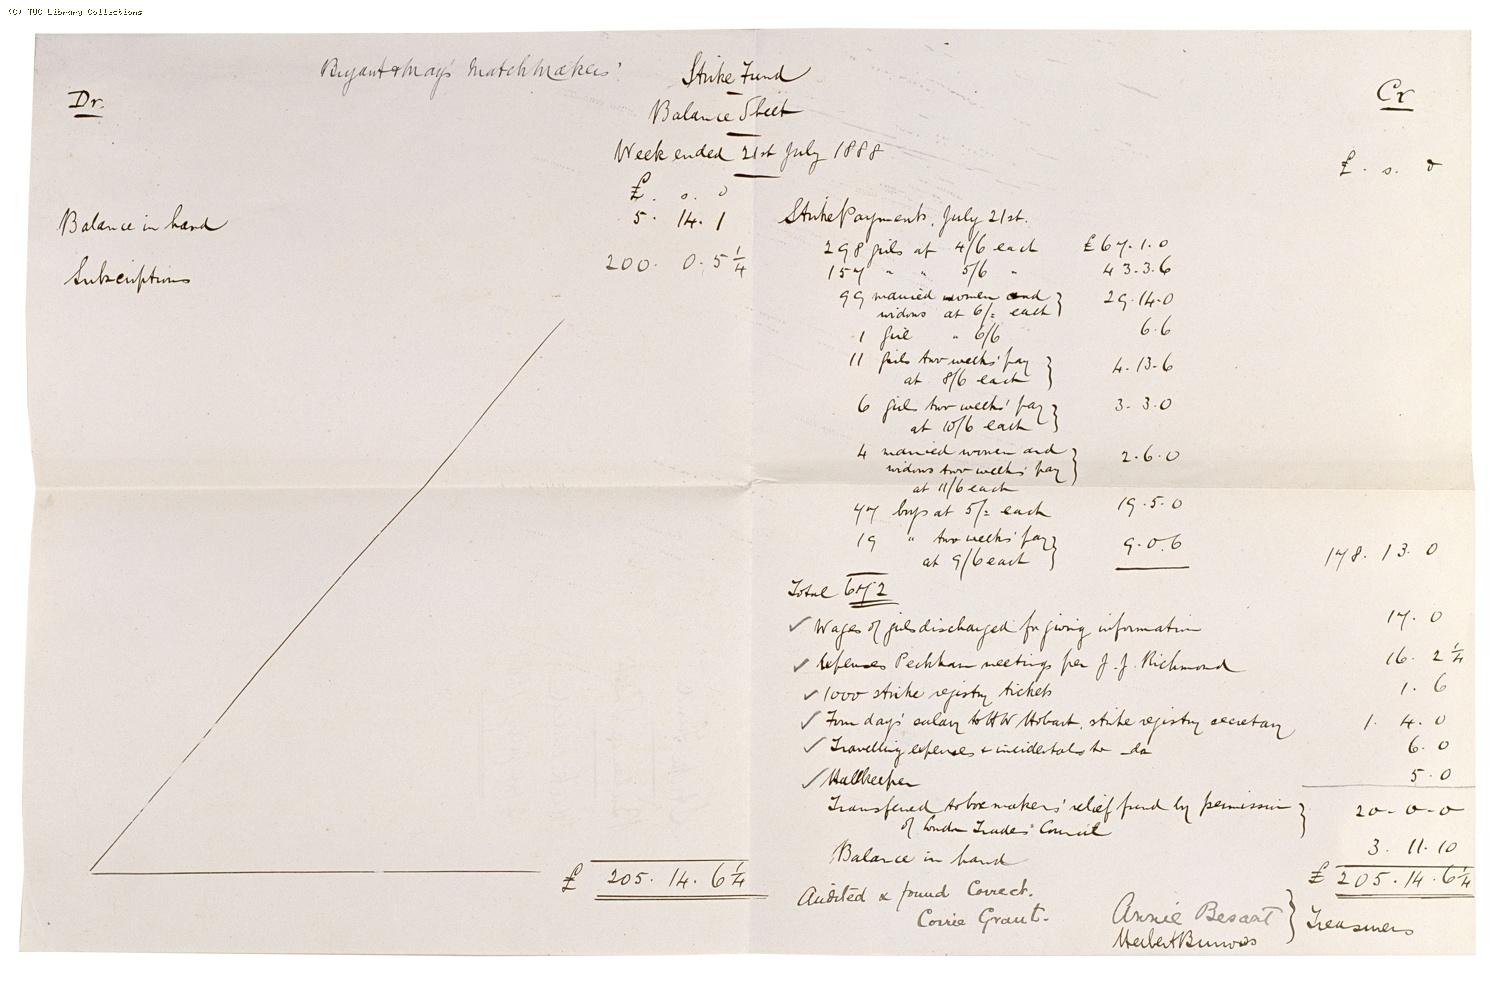 Bryant and May's Matchmakers' Strike Fund Balance Sheet, week ended 21 July 1888